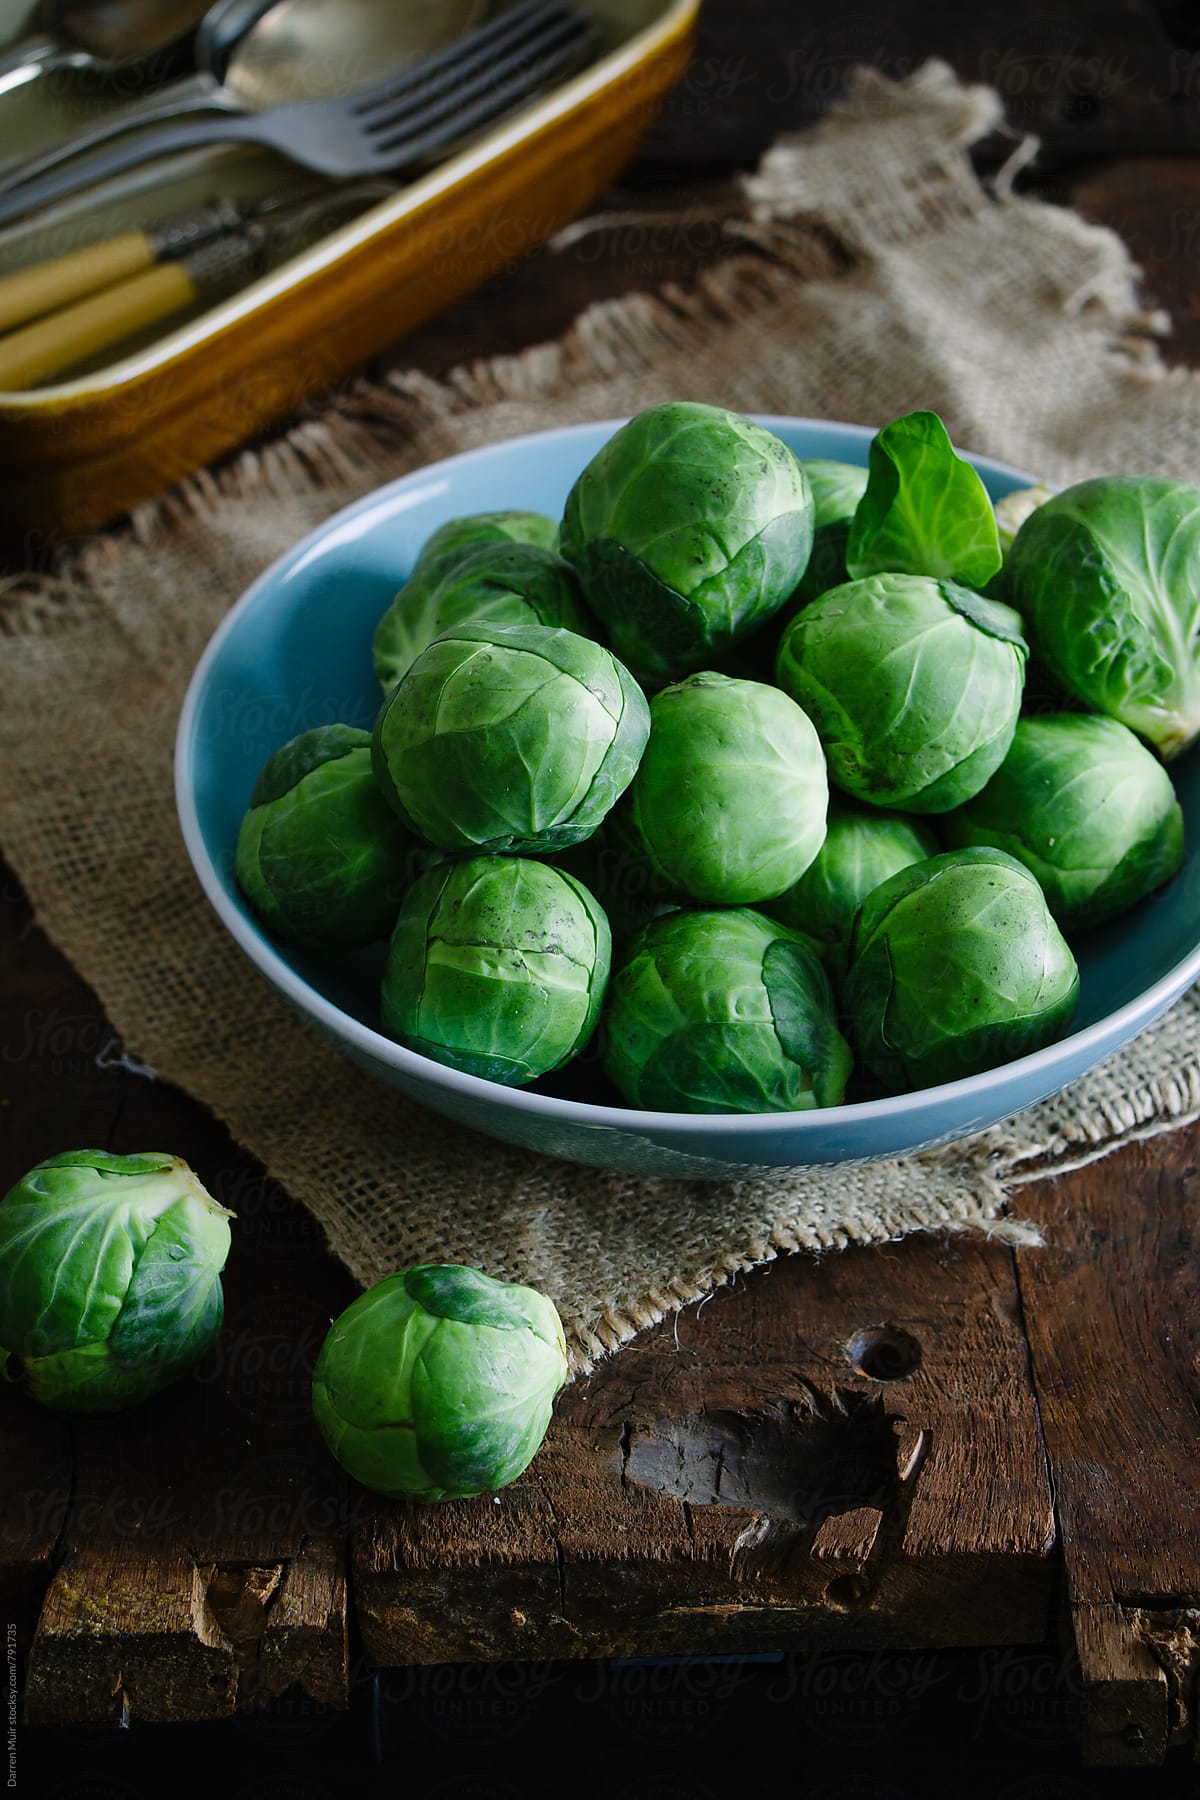 Brussels sprouts in a bowl on a table ready to be prepared for cooking.